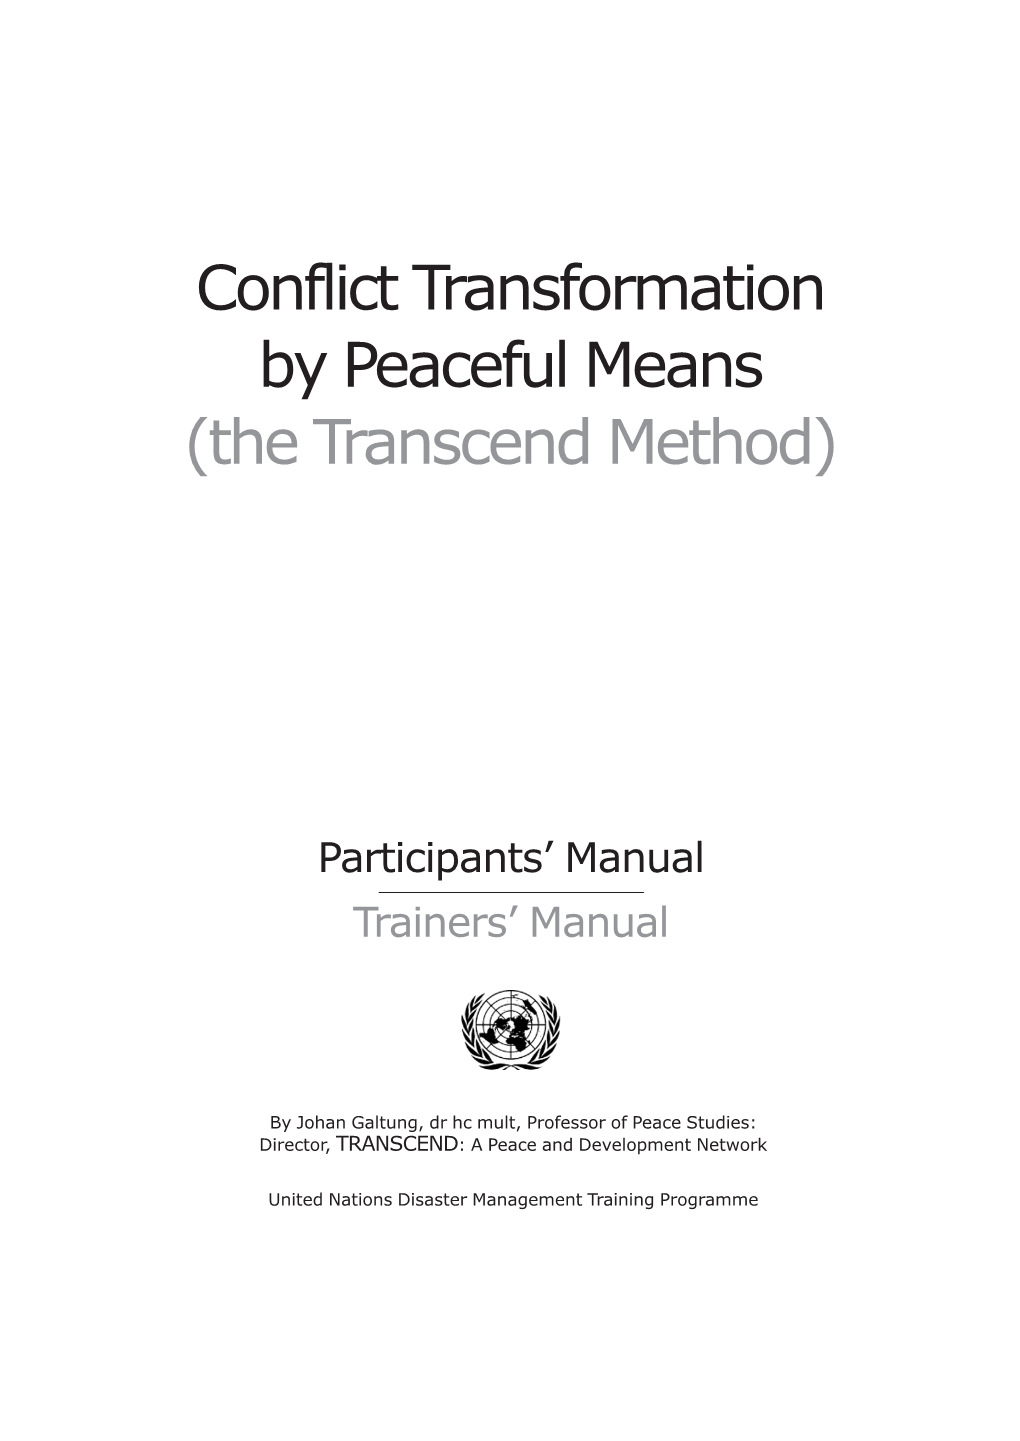 Conflict Transformation by Peaceful Means (The Transcend Method)